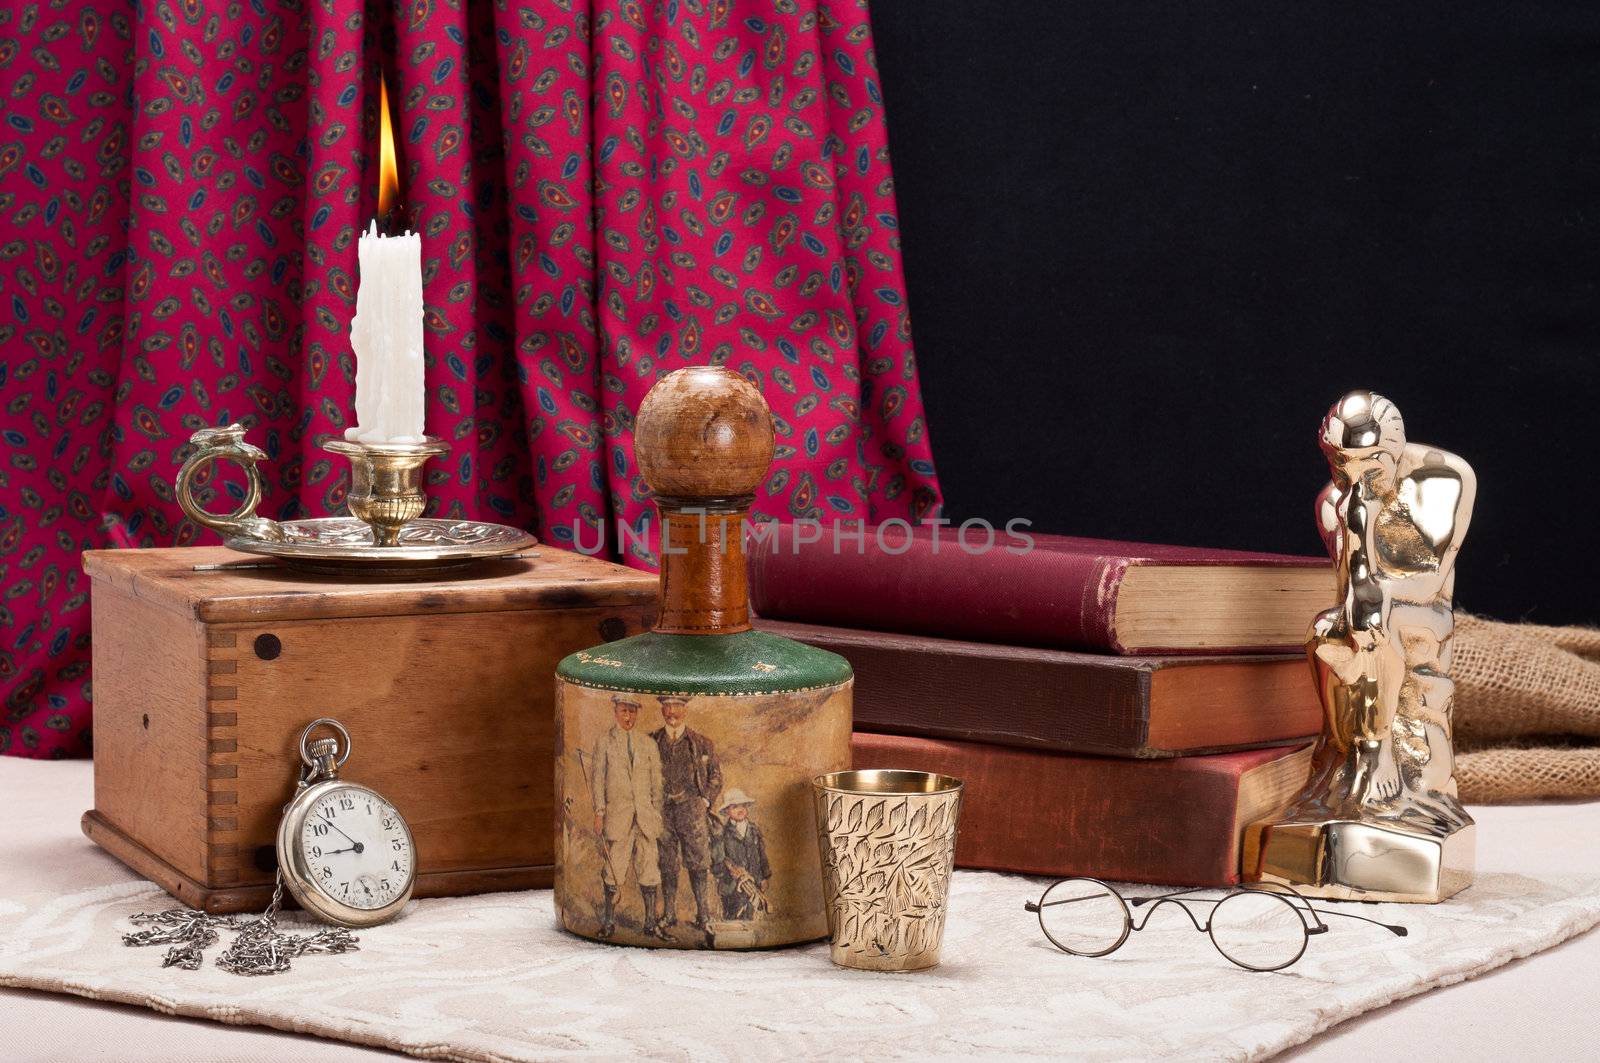 Vintage still life with antique spectacles and pocket watch